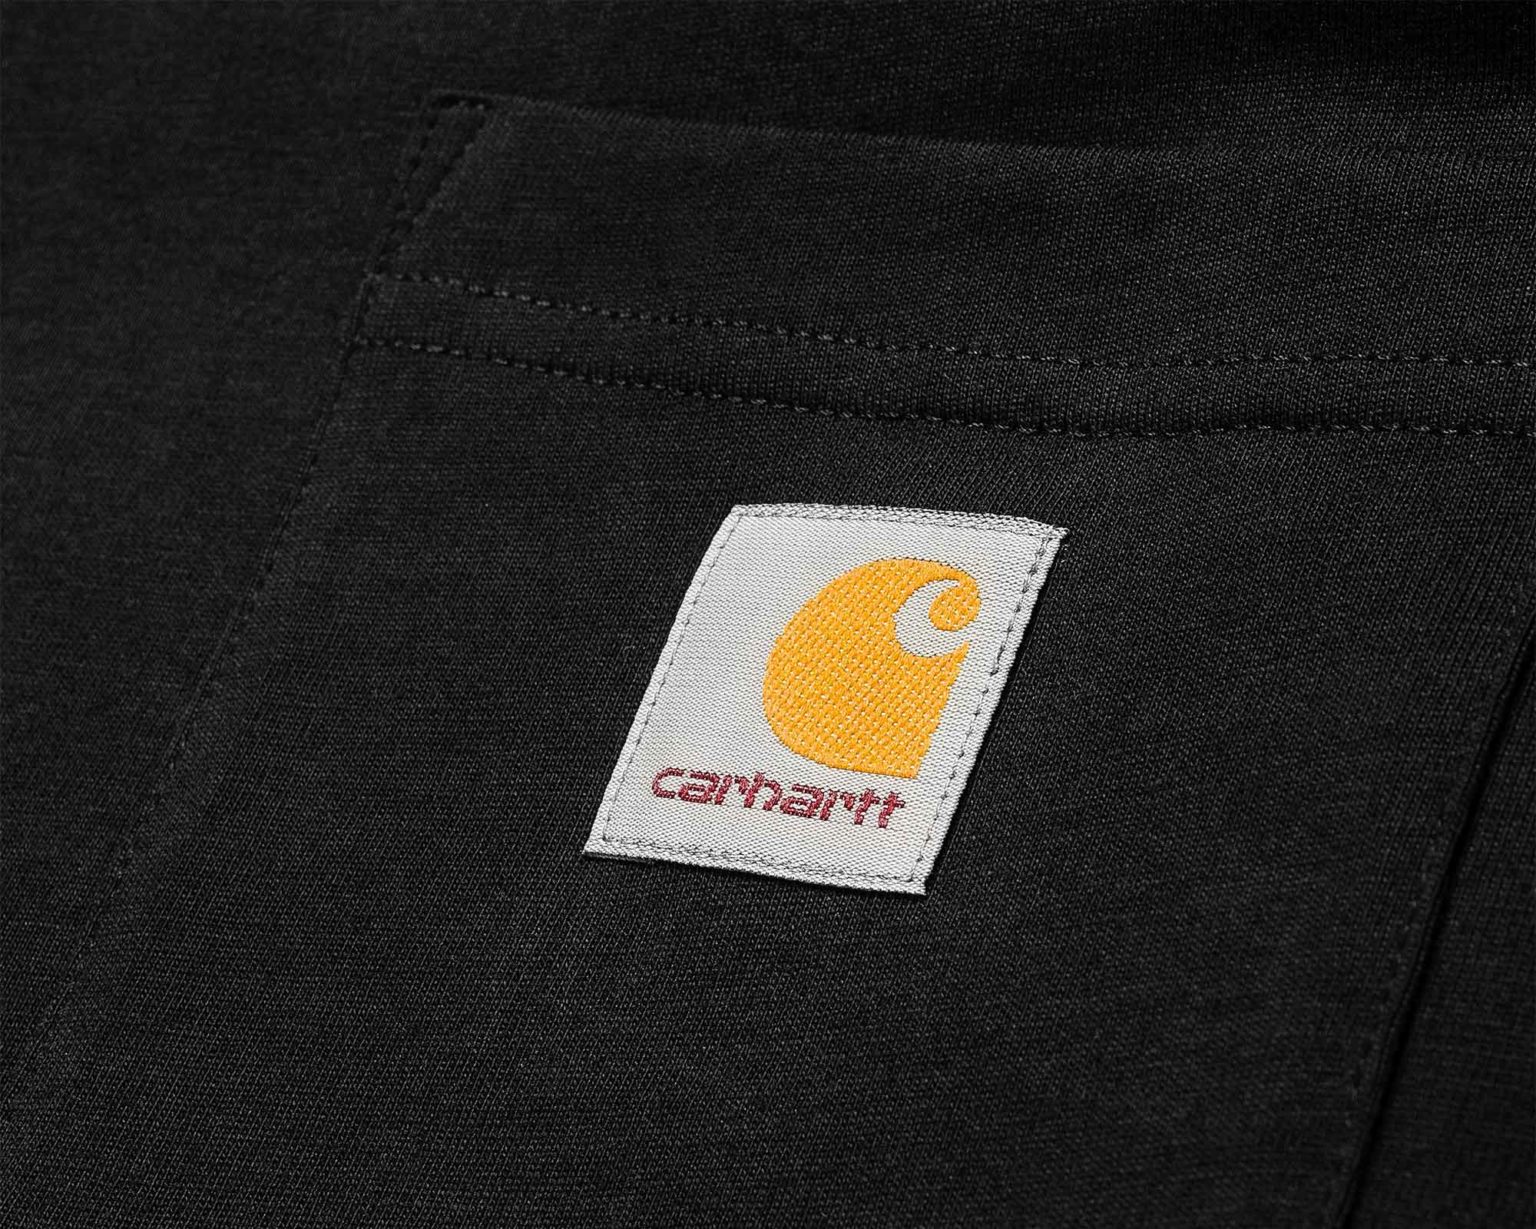 How Ethical Is Carhartt? - Good On You